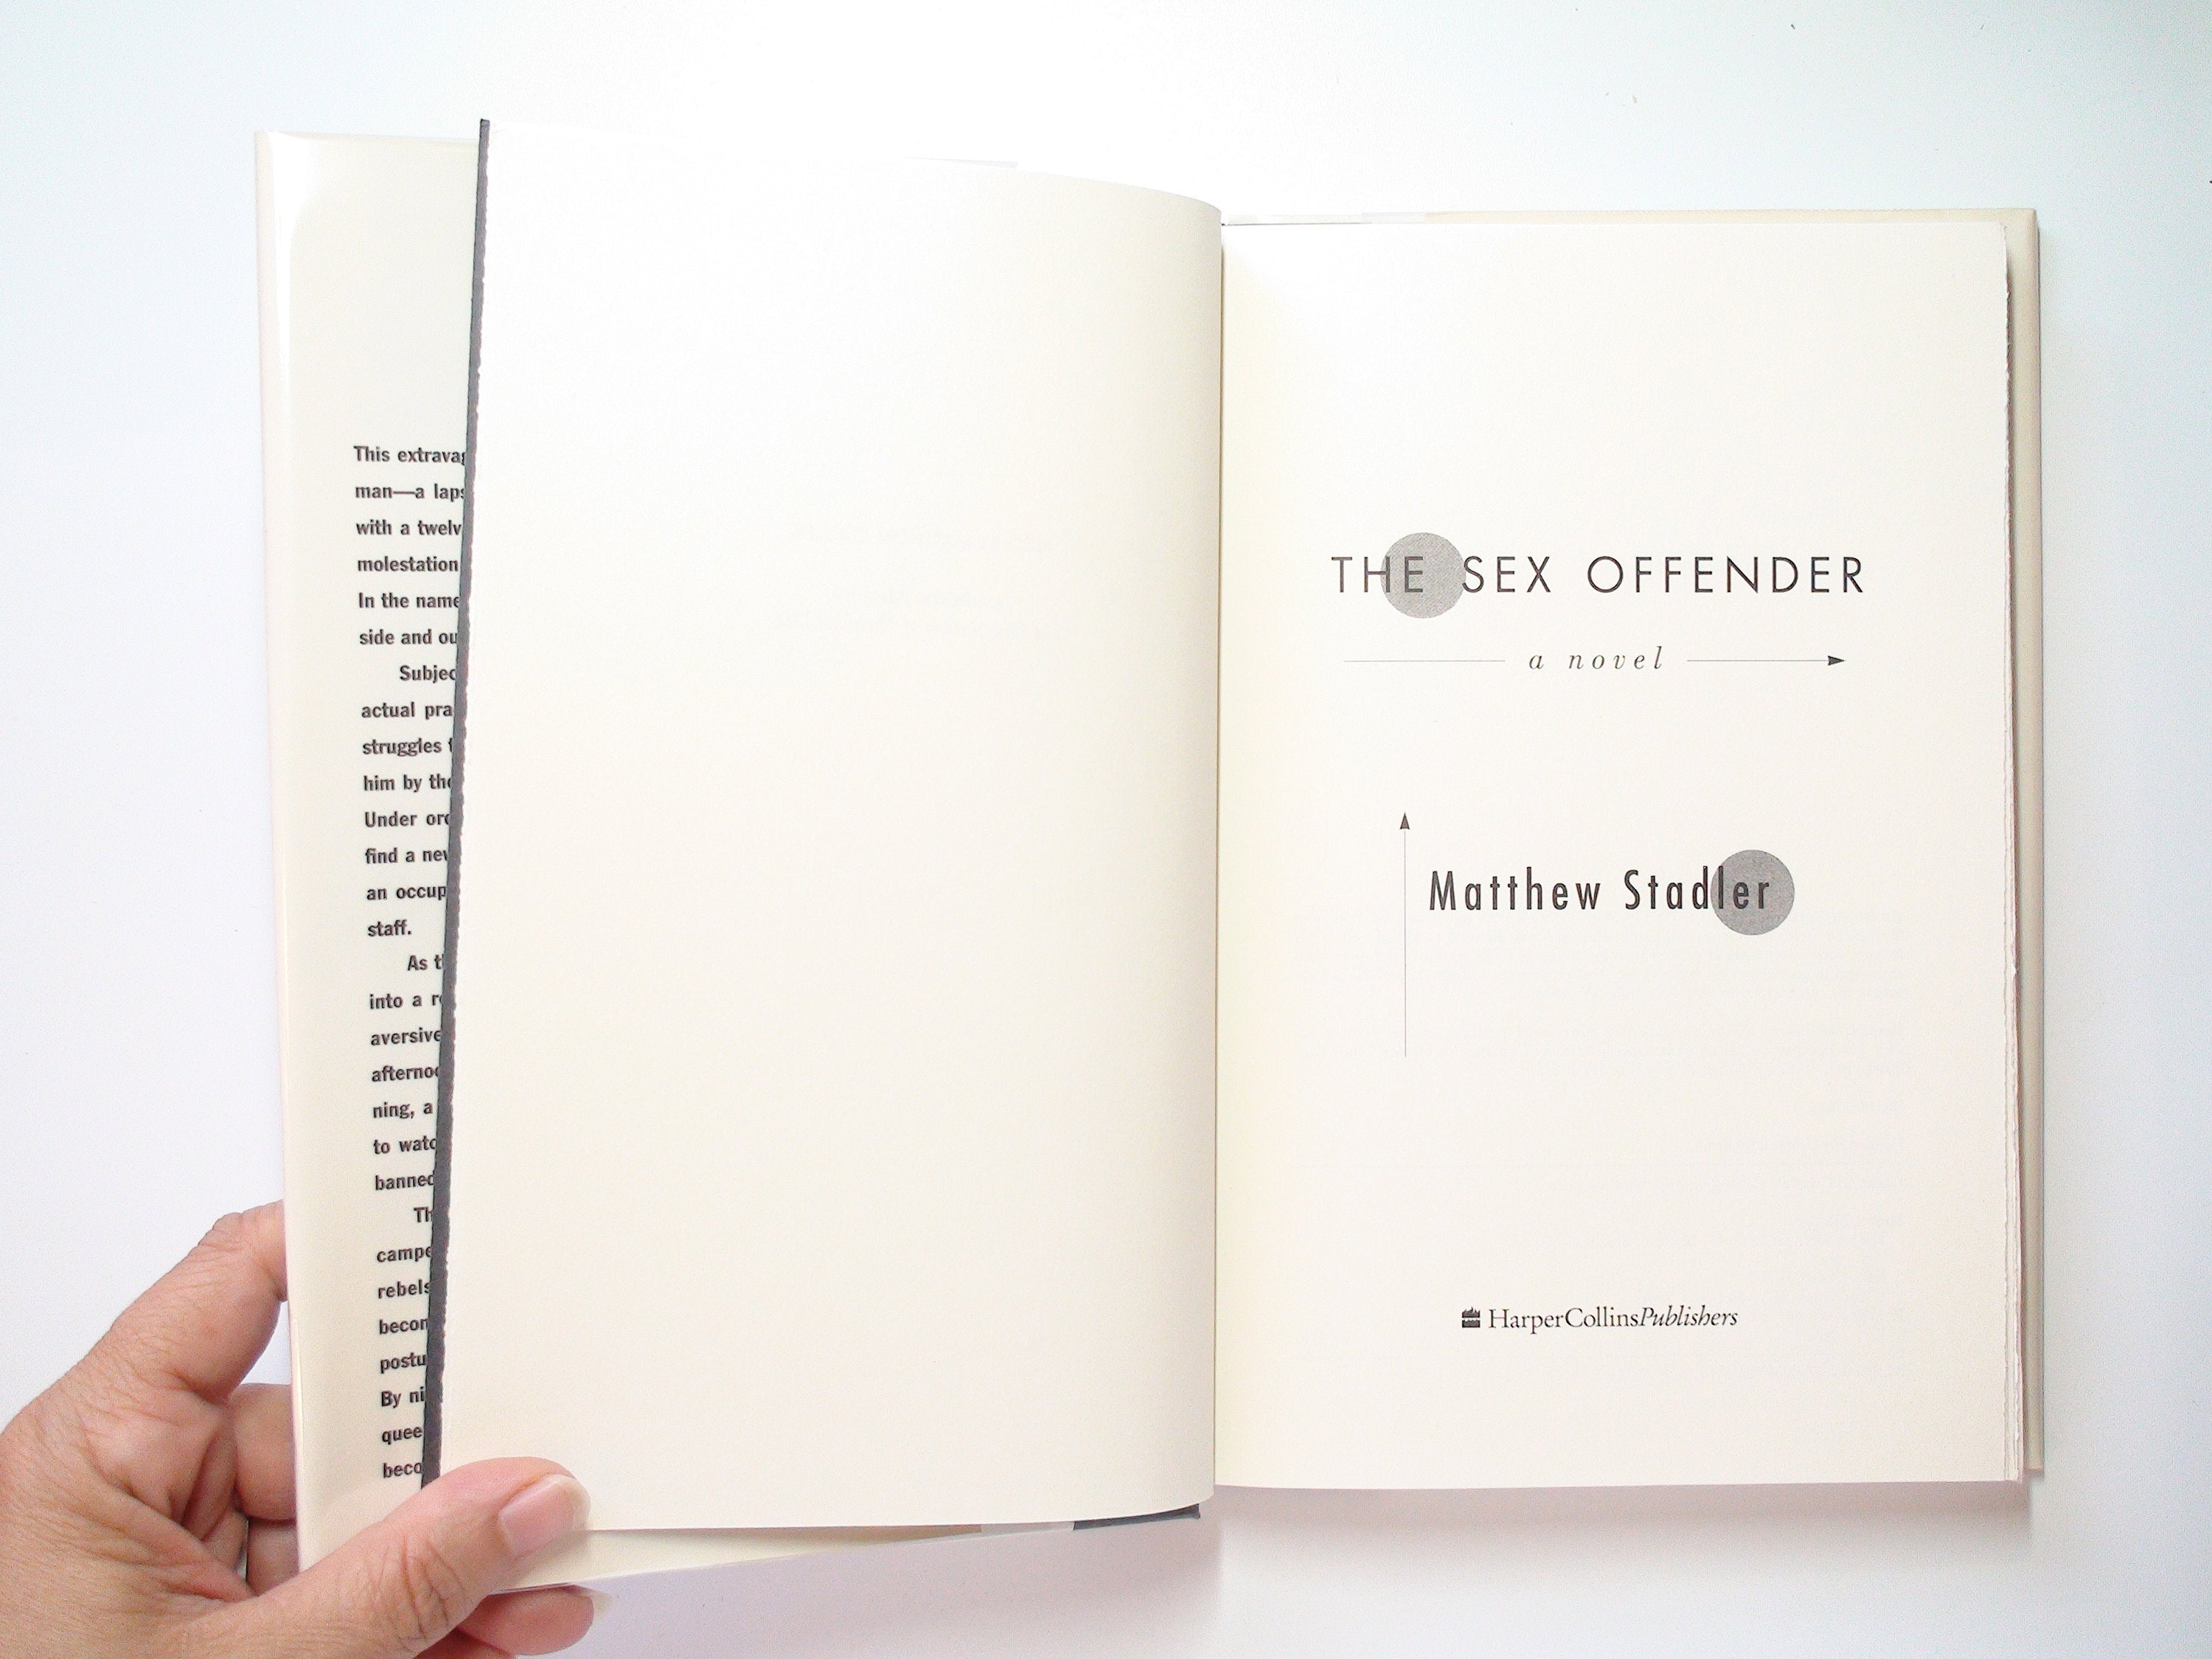 The Sex Offender, by Matthew Stadler, Stated 1st Ed, Hardcover w D/J, 1994